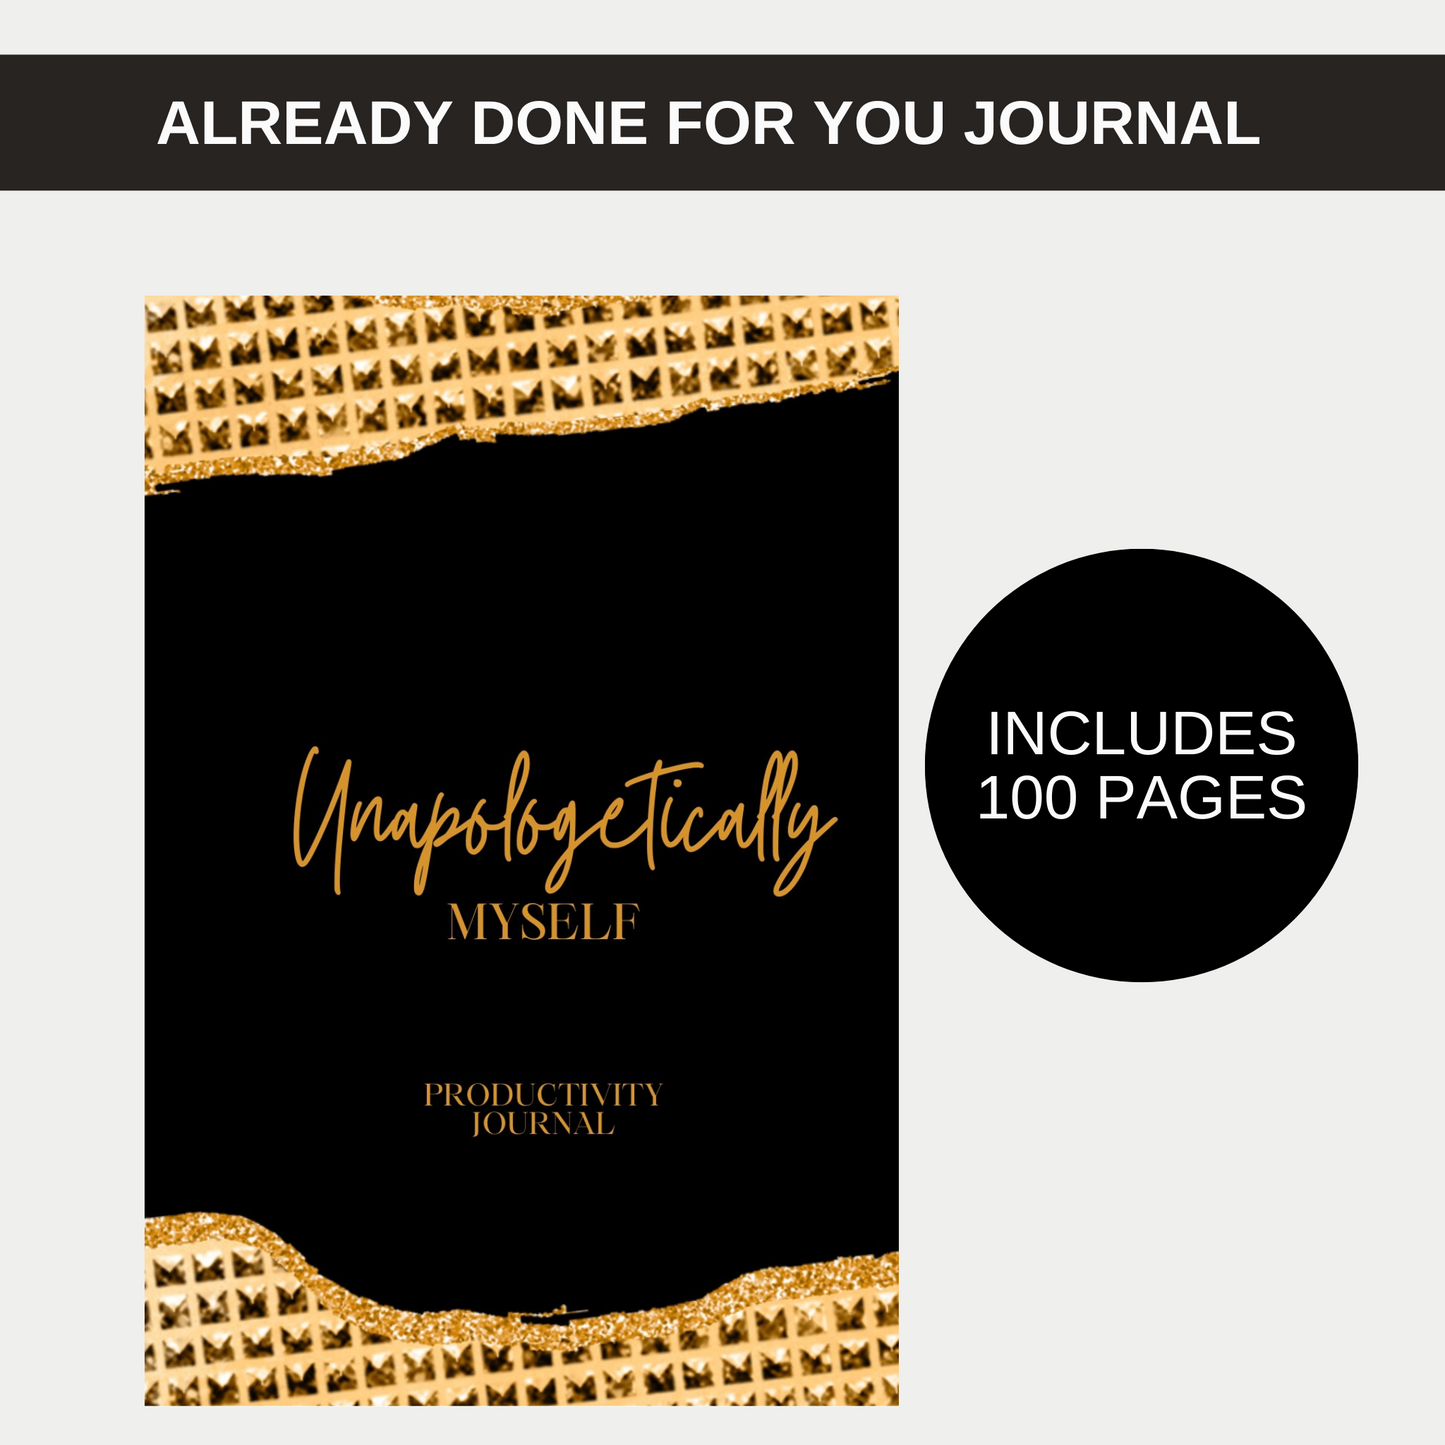 Unapologetically Myself Productivity Journal